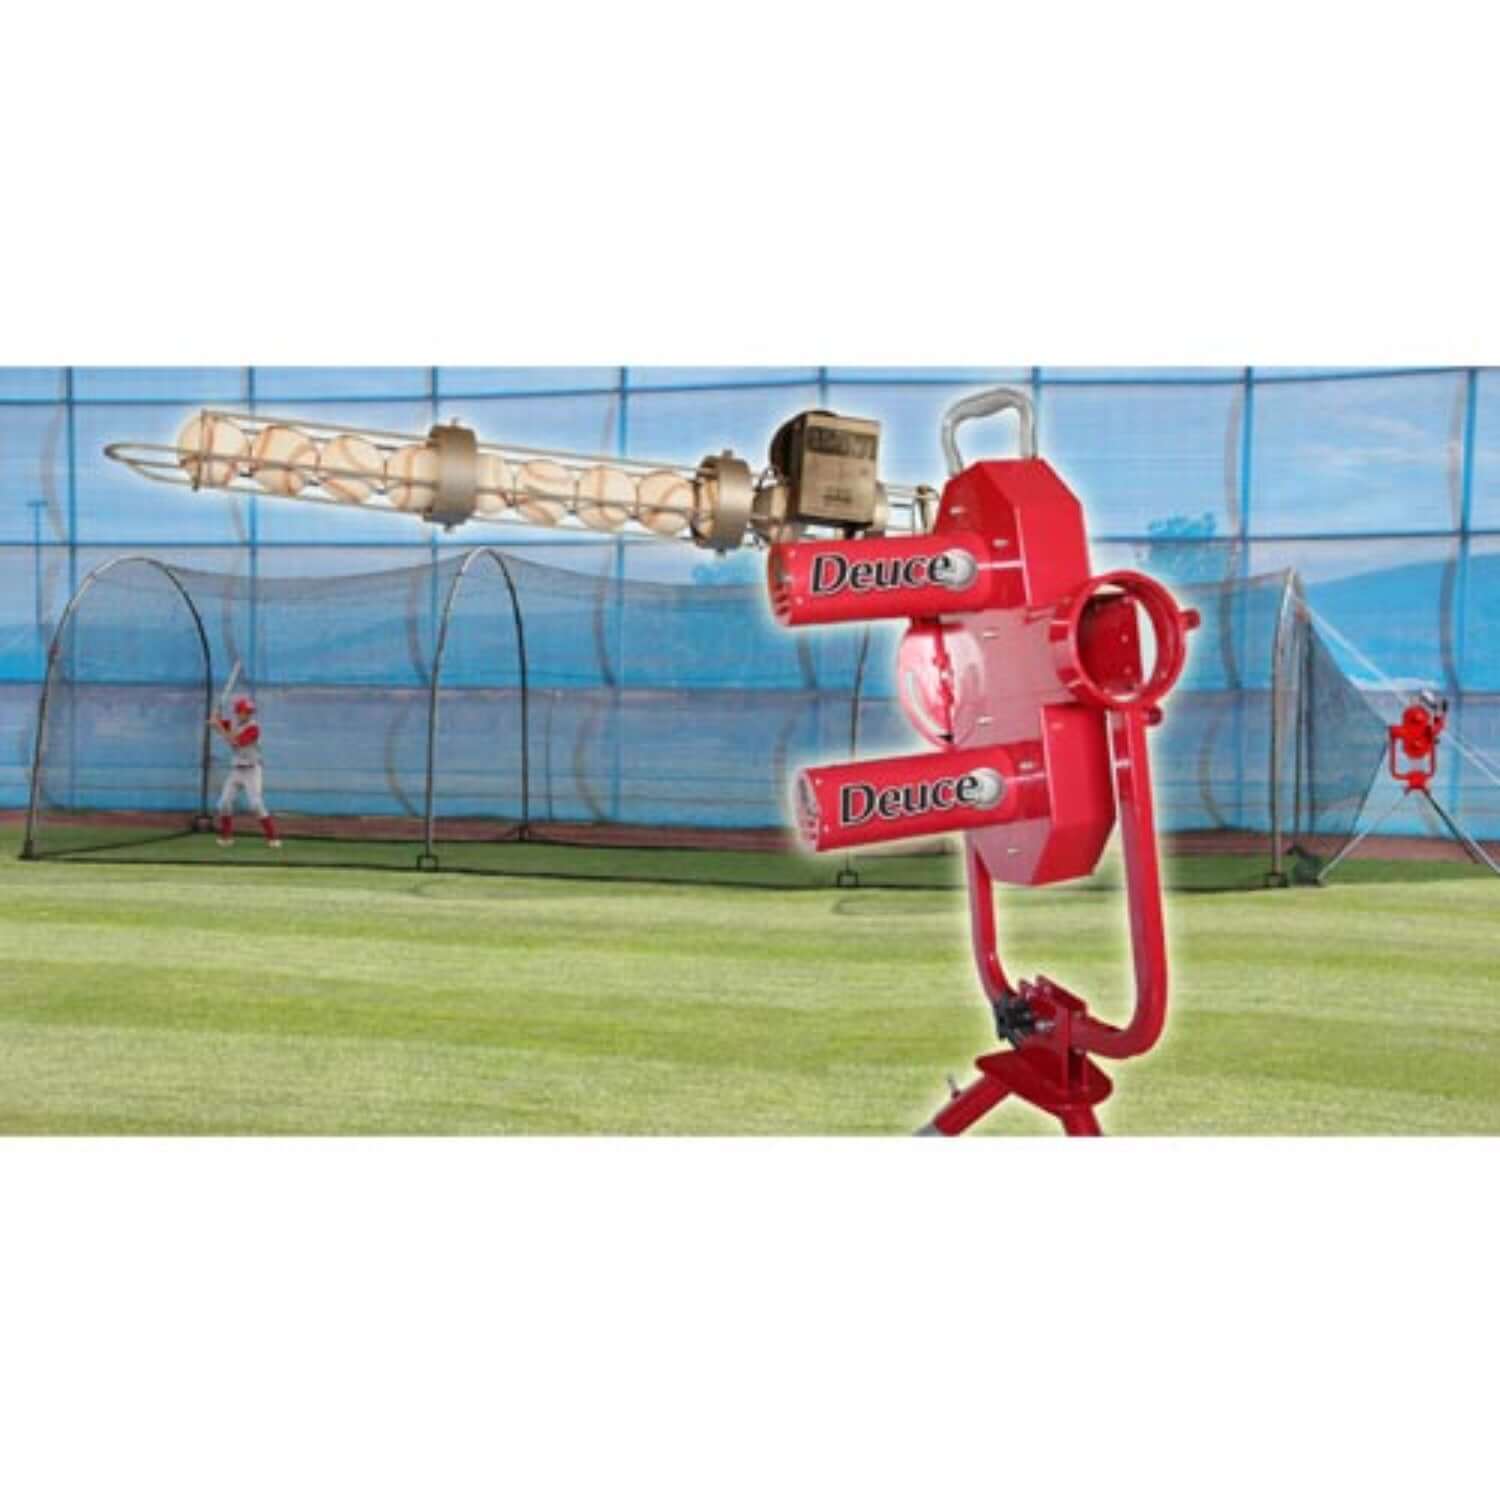 Heater Sport | 75 MPH Pitching Real Ball Machine with Xtender 36' Batting Cage - Pitch Machine Pros